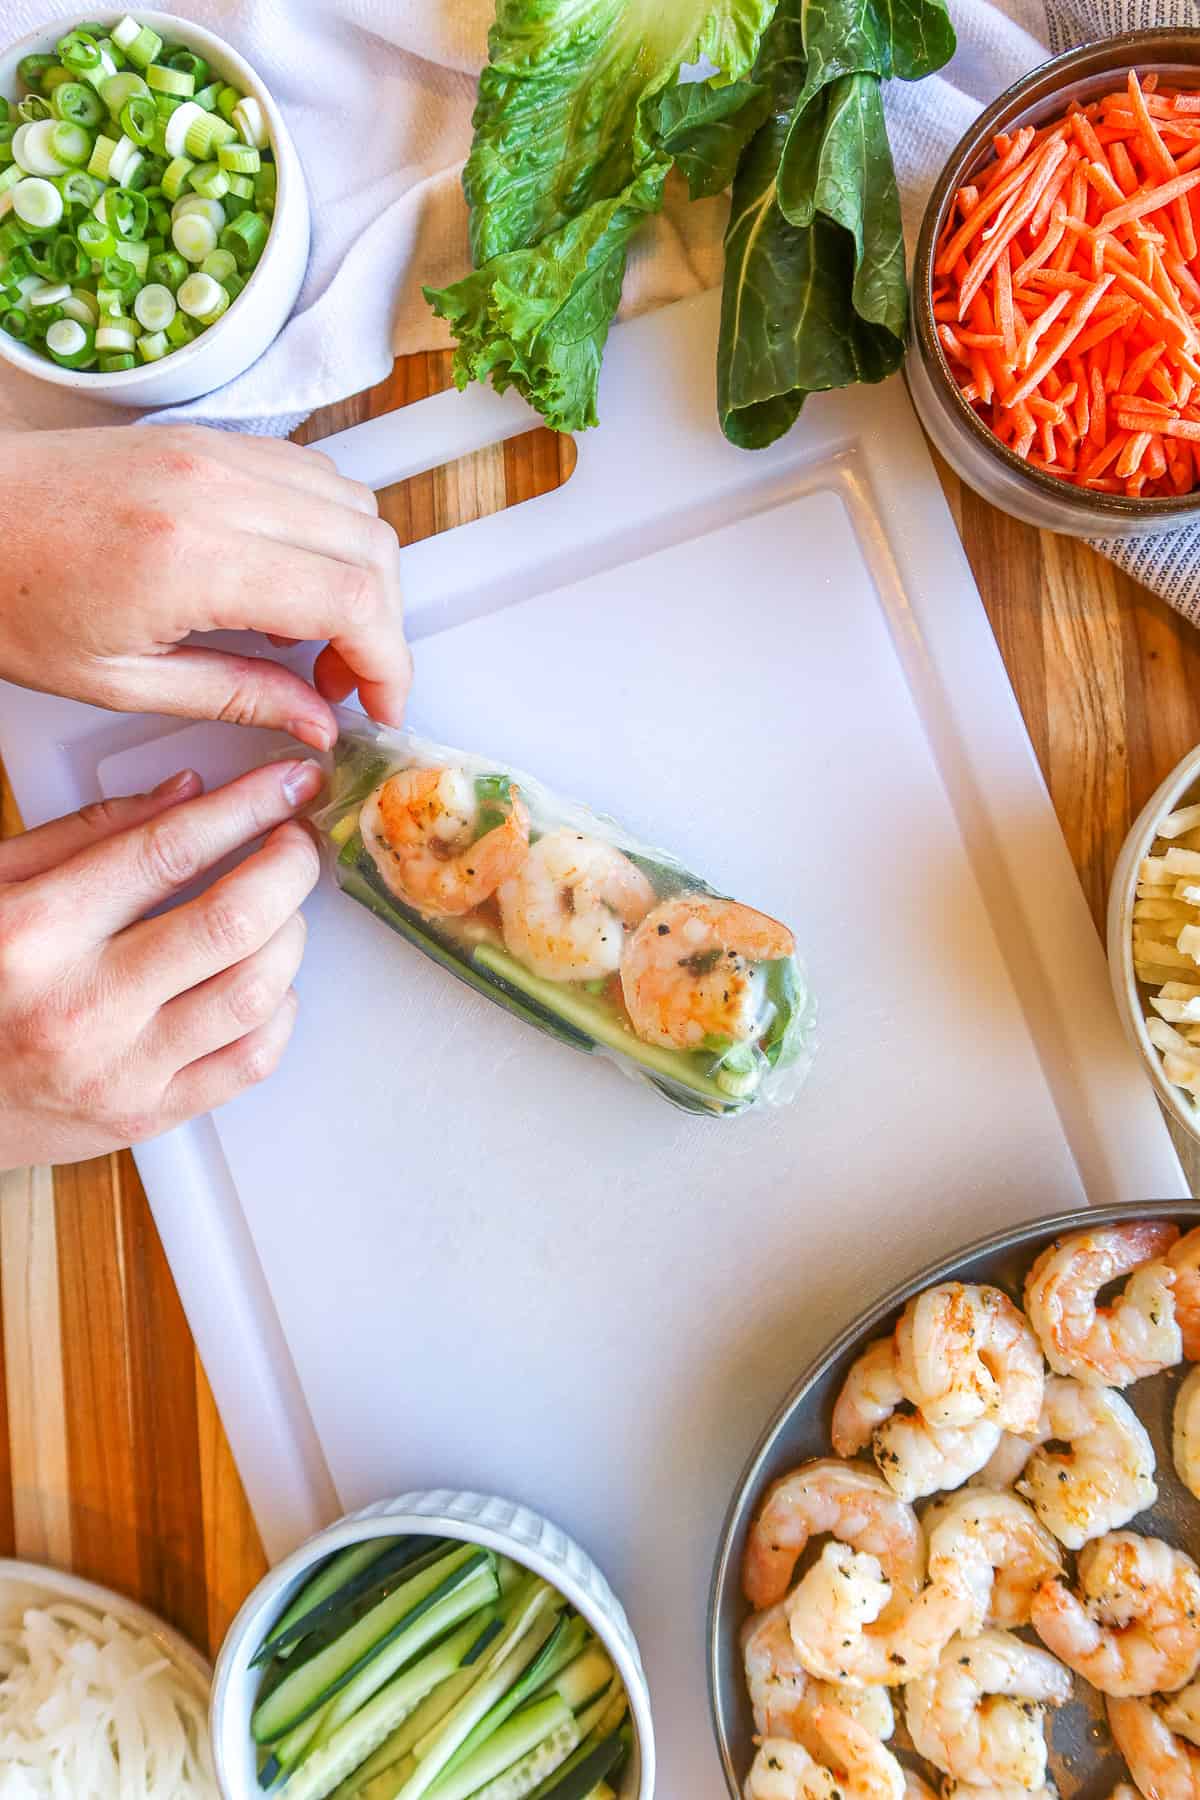 Wrapping softened rice paper around shrimp and vegetables.